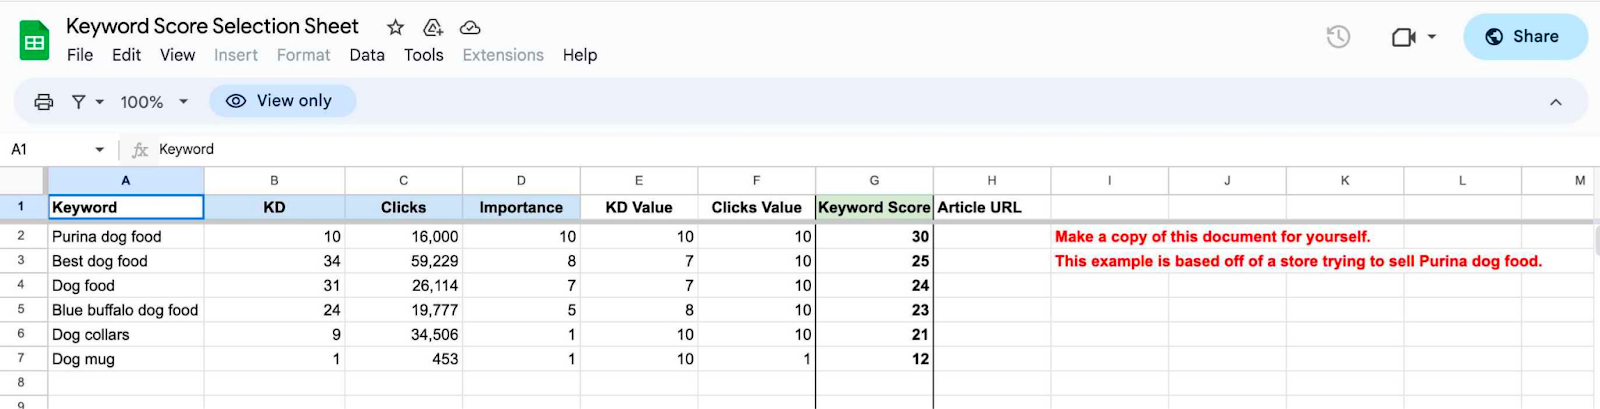 Low Competition Keywords search results keyword selection sheets